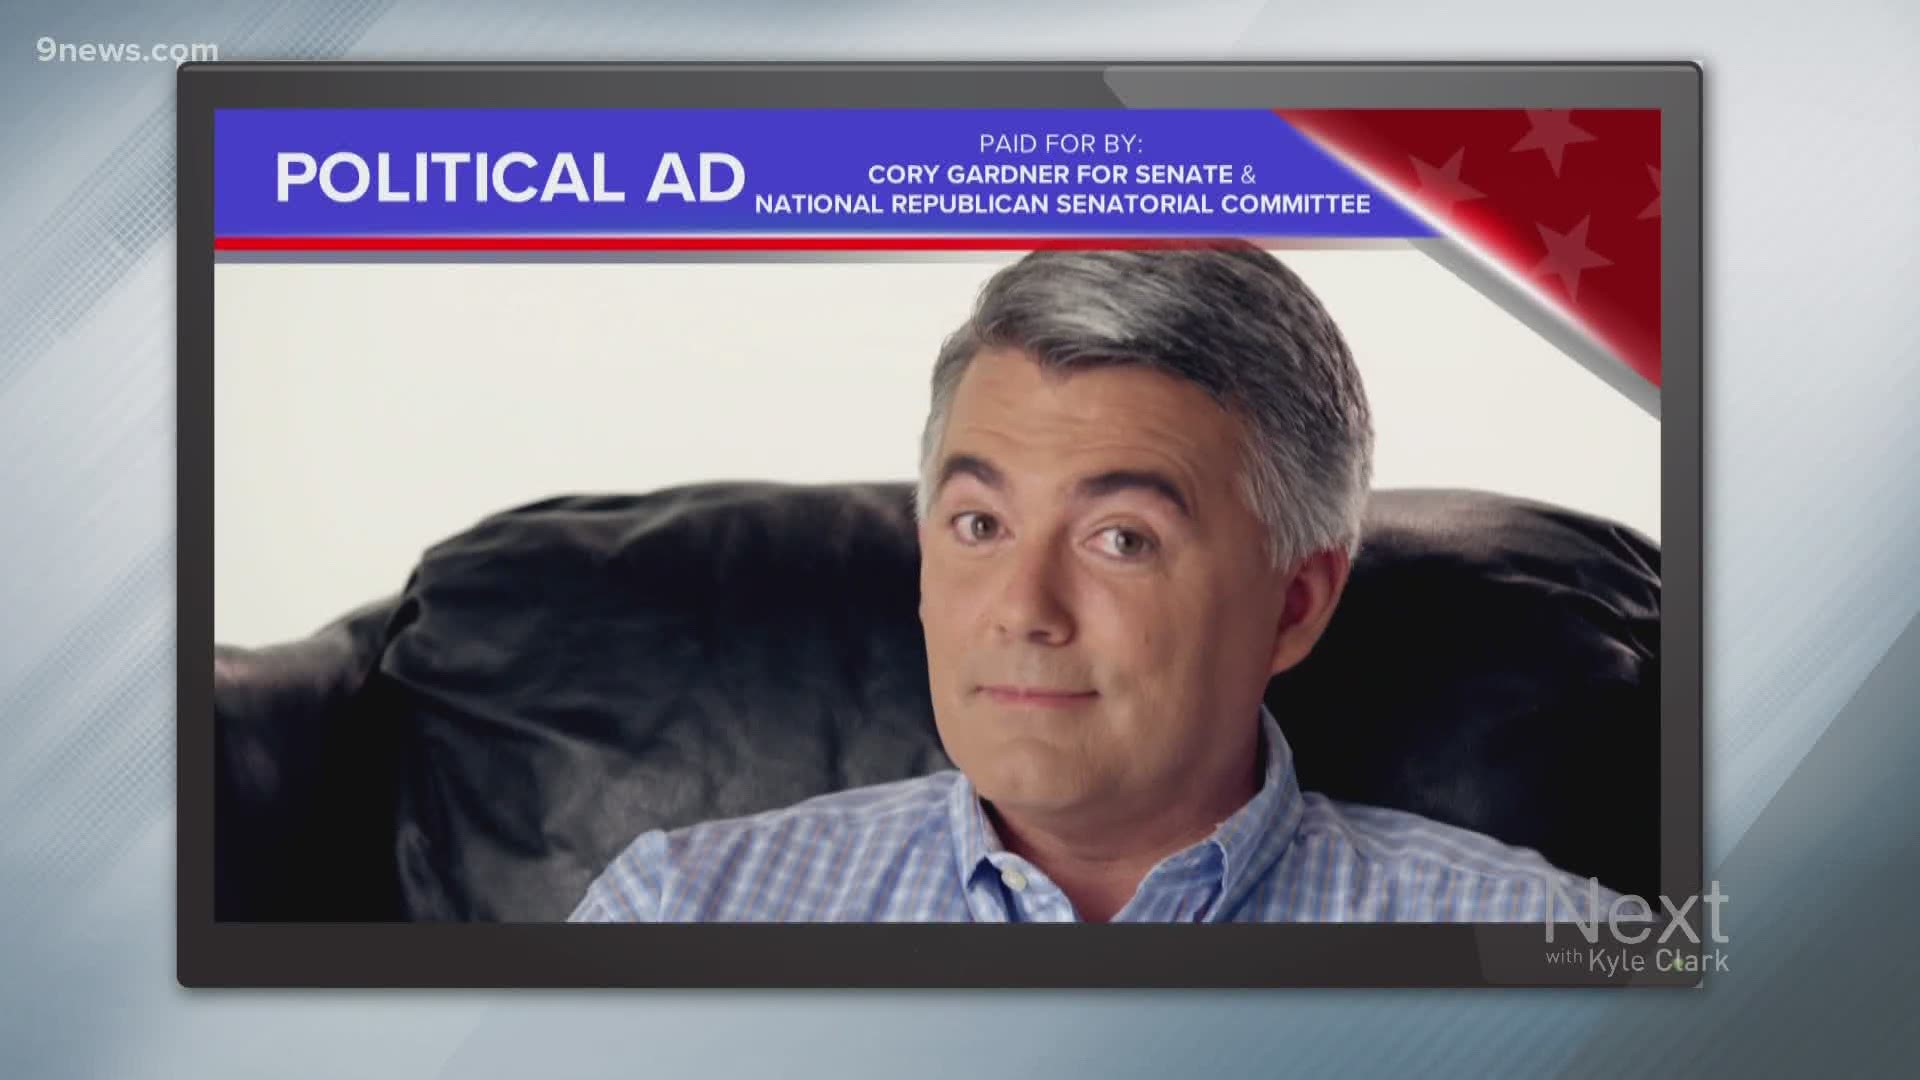 He doesn't yet have a direct opponent but Republican Sen. Cory Gardner produced a political ad focusing on Democrat candidate John Hickenlooper.